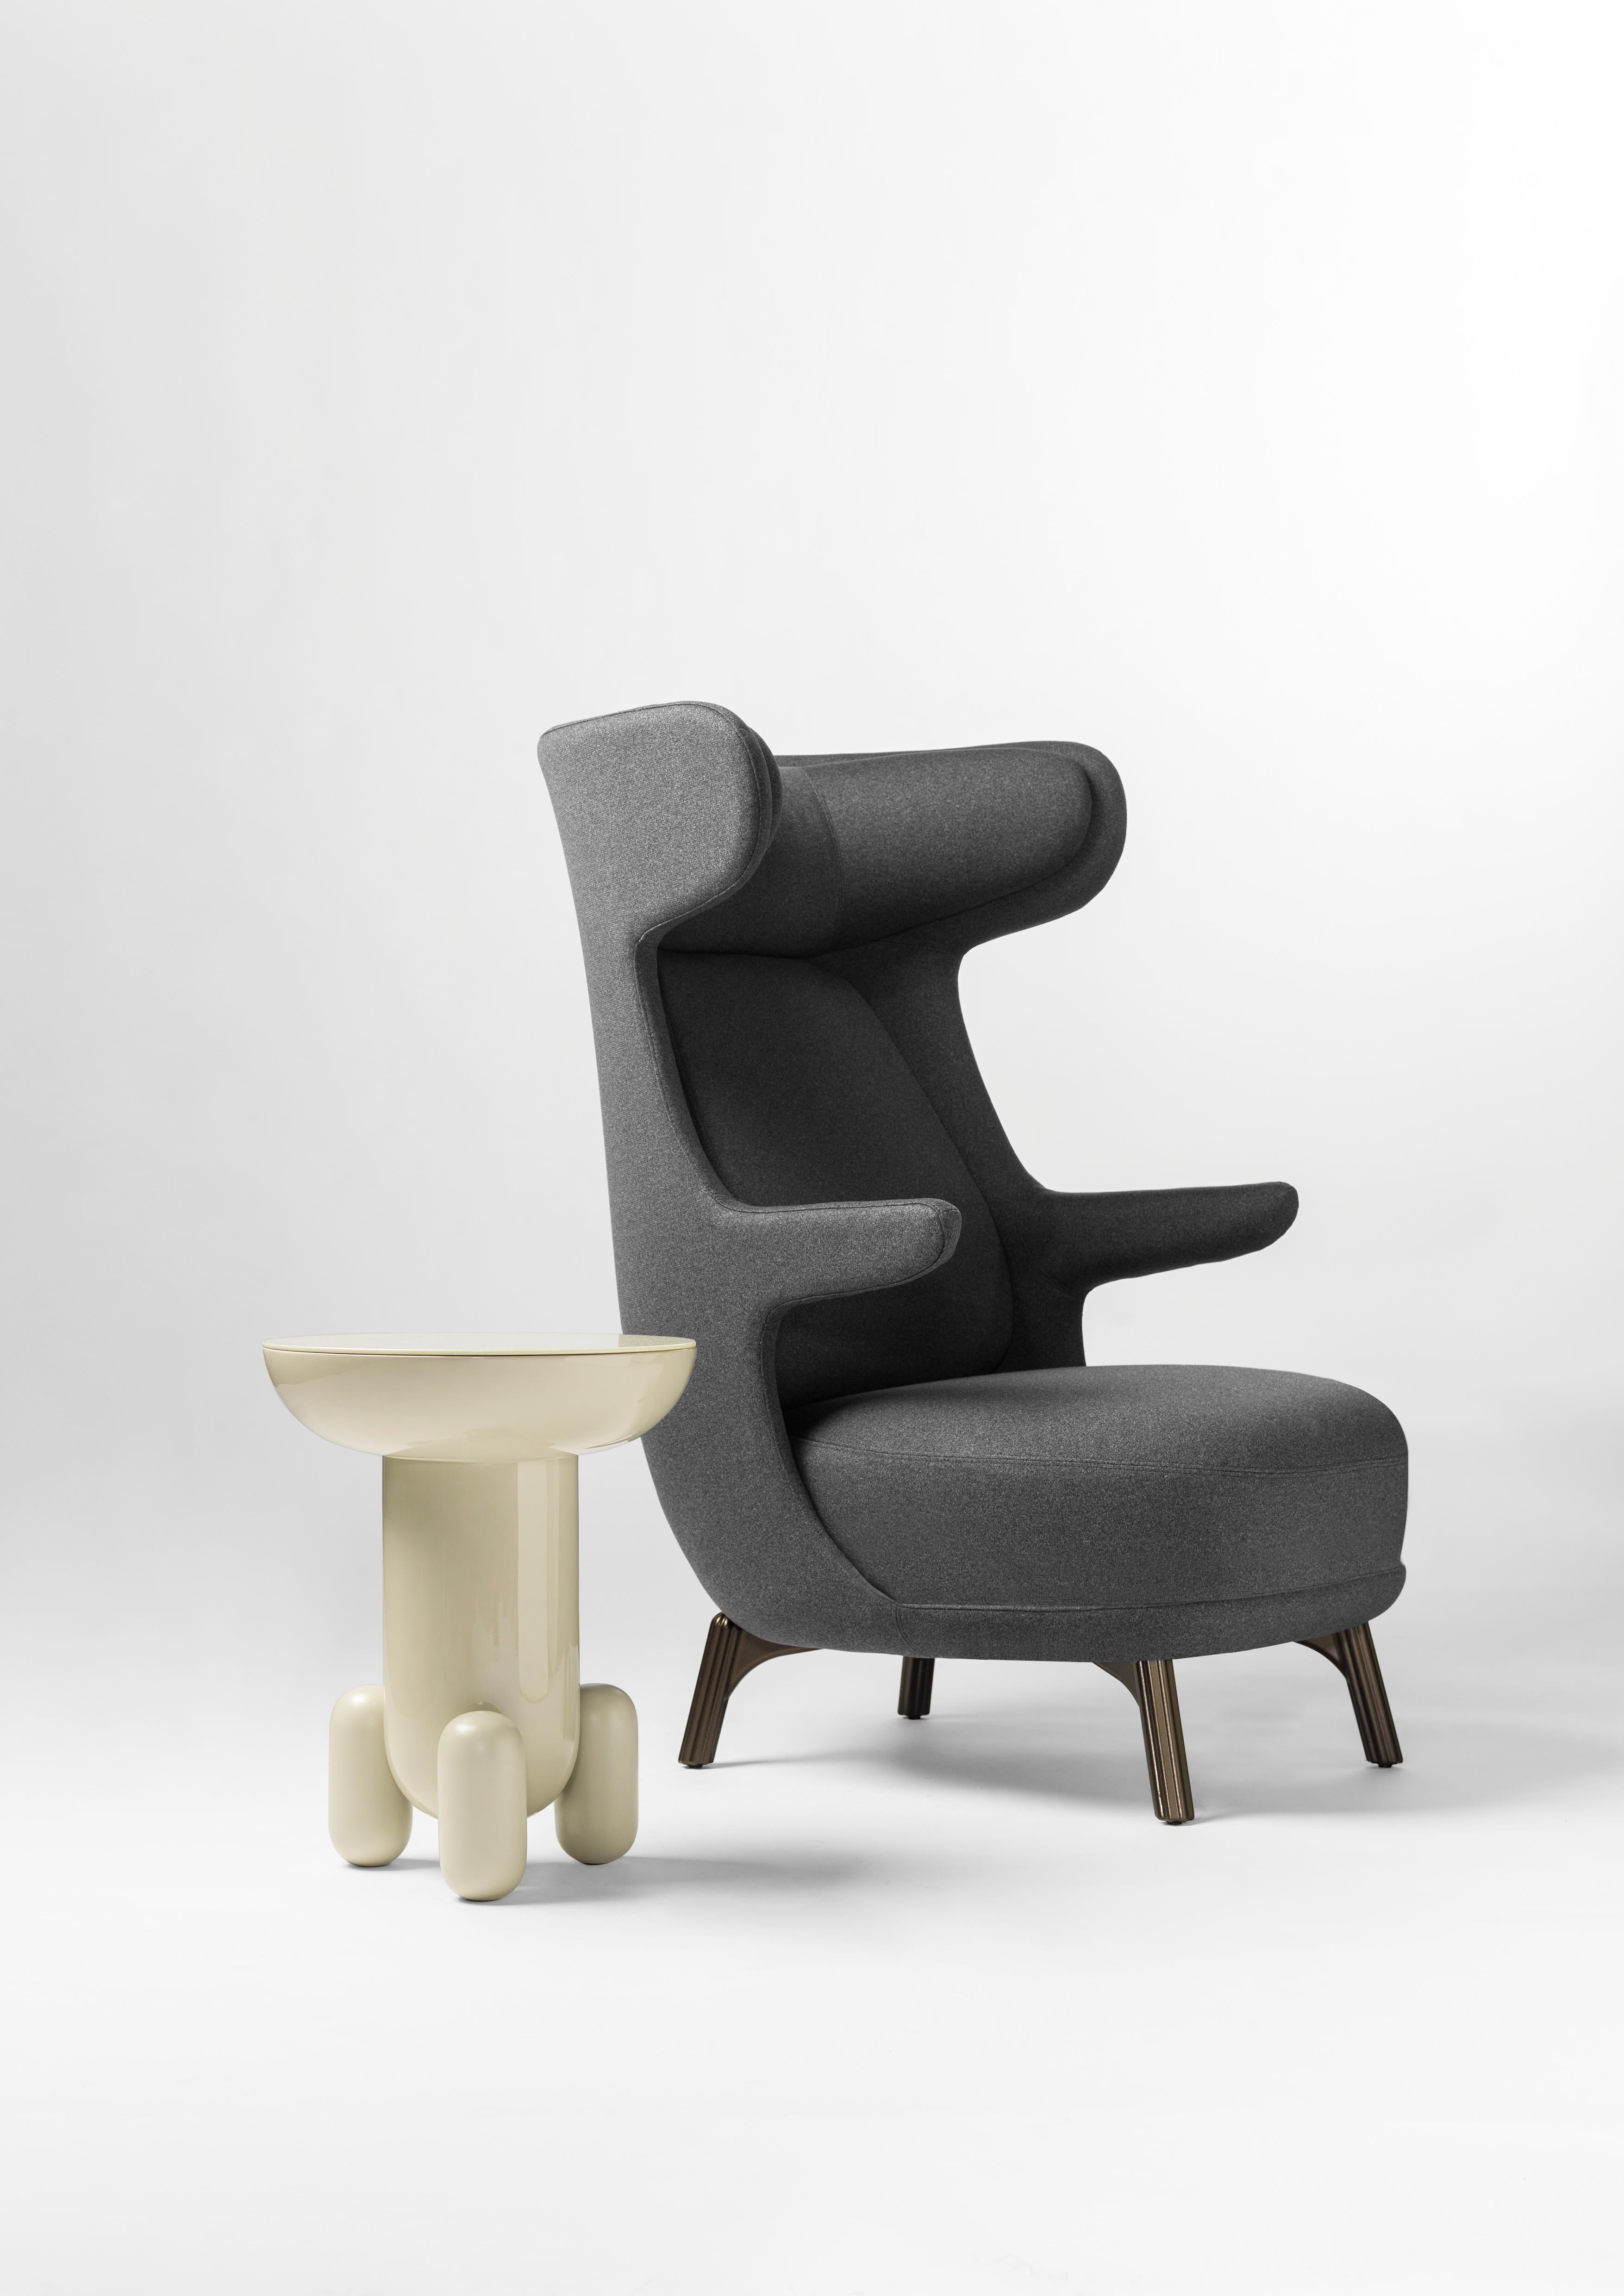 Hayon Edition Dino Armchair in Fabric and Leather Upholstery by BD Barcelona In New Condition For Sale In Rhinebeck, NY